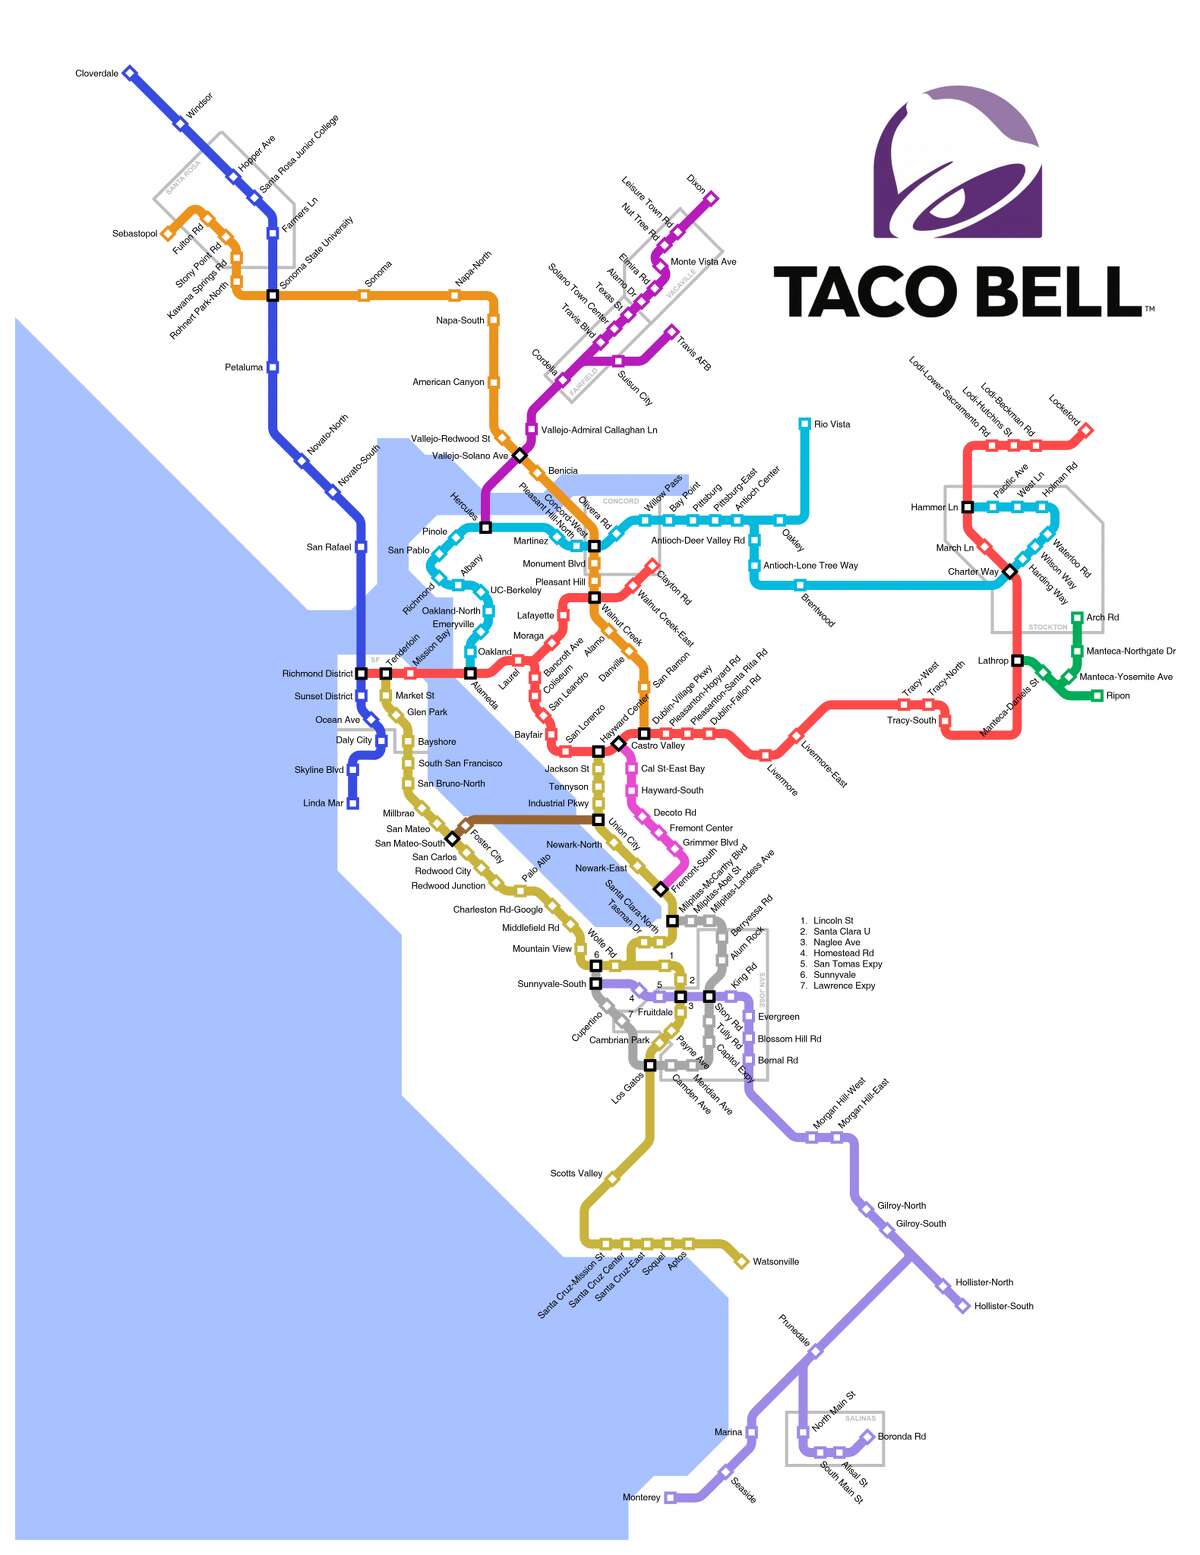 A map envisioning the Bay Area's transit system connected by Taco Bell restaurants, created by 16-year-old Jeff McGough.